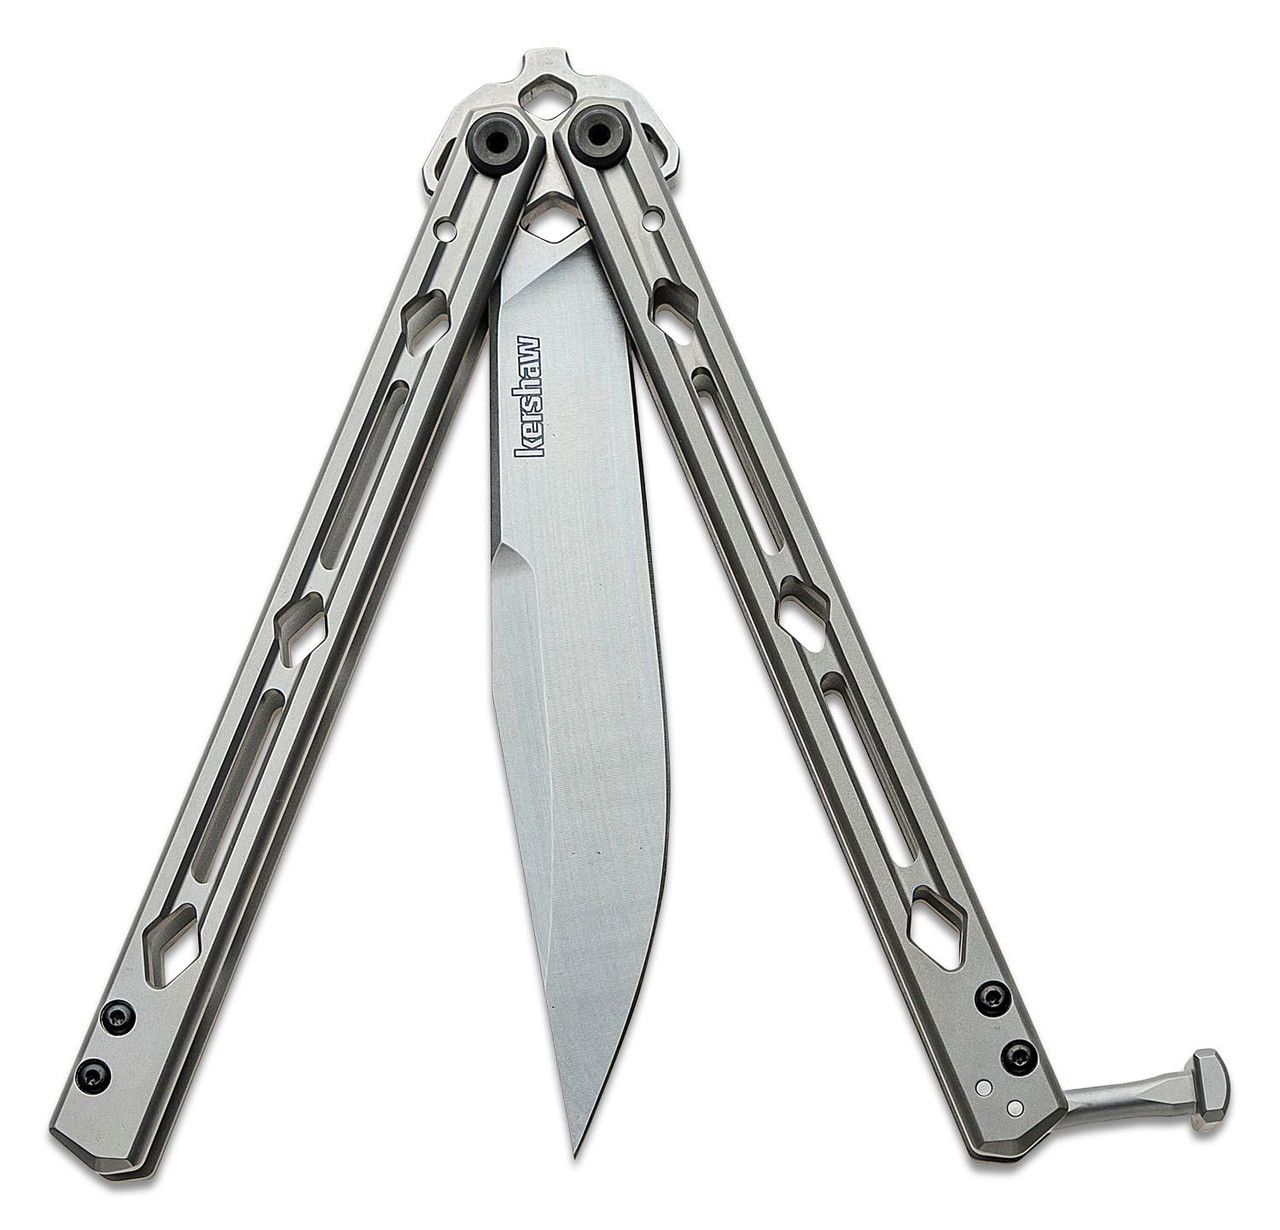 Kershaw 5150 Lucha Balisong Butterfly Knife 4.6 Stonewashed Sandvik 14C28N  Clip Point Blade, Stonewashed Stainless Steel Handles